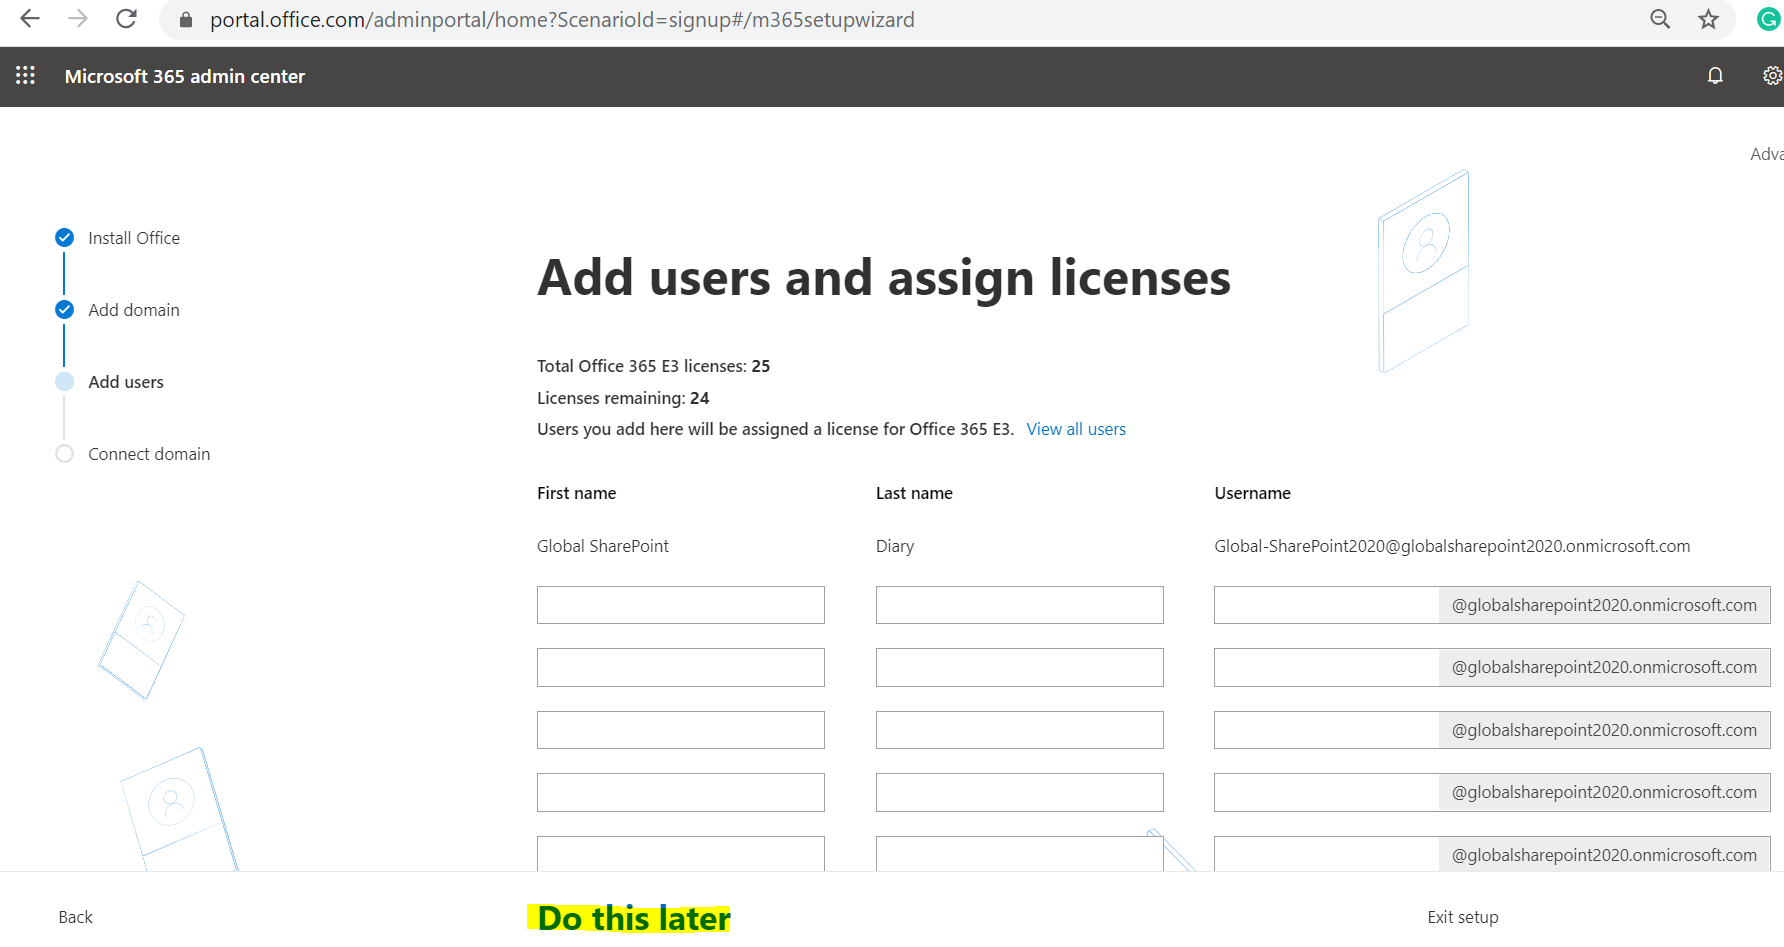 Office 365 E3 Trial - Microsoft 365 admin center home page - Add Users and Assign Licenses